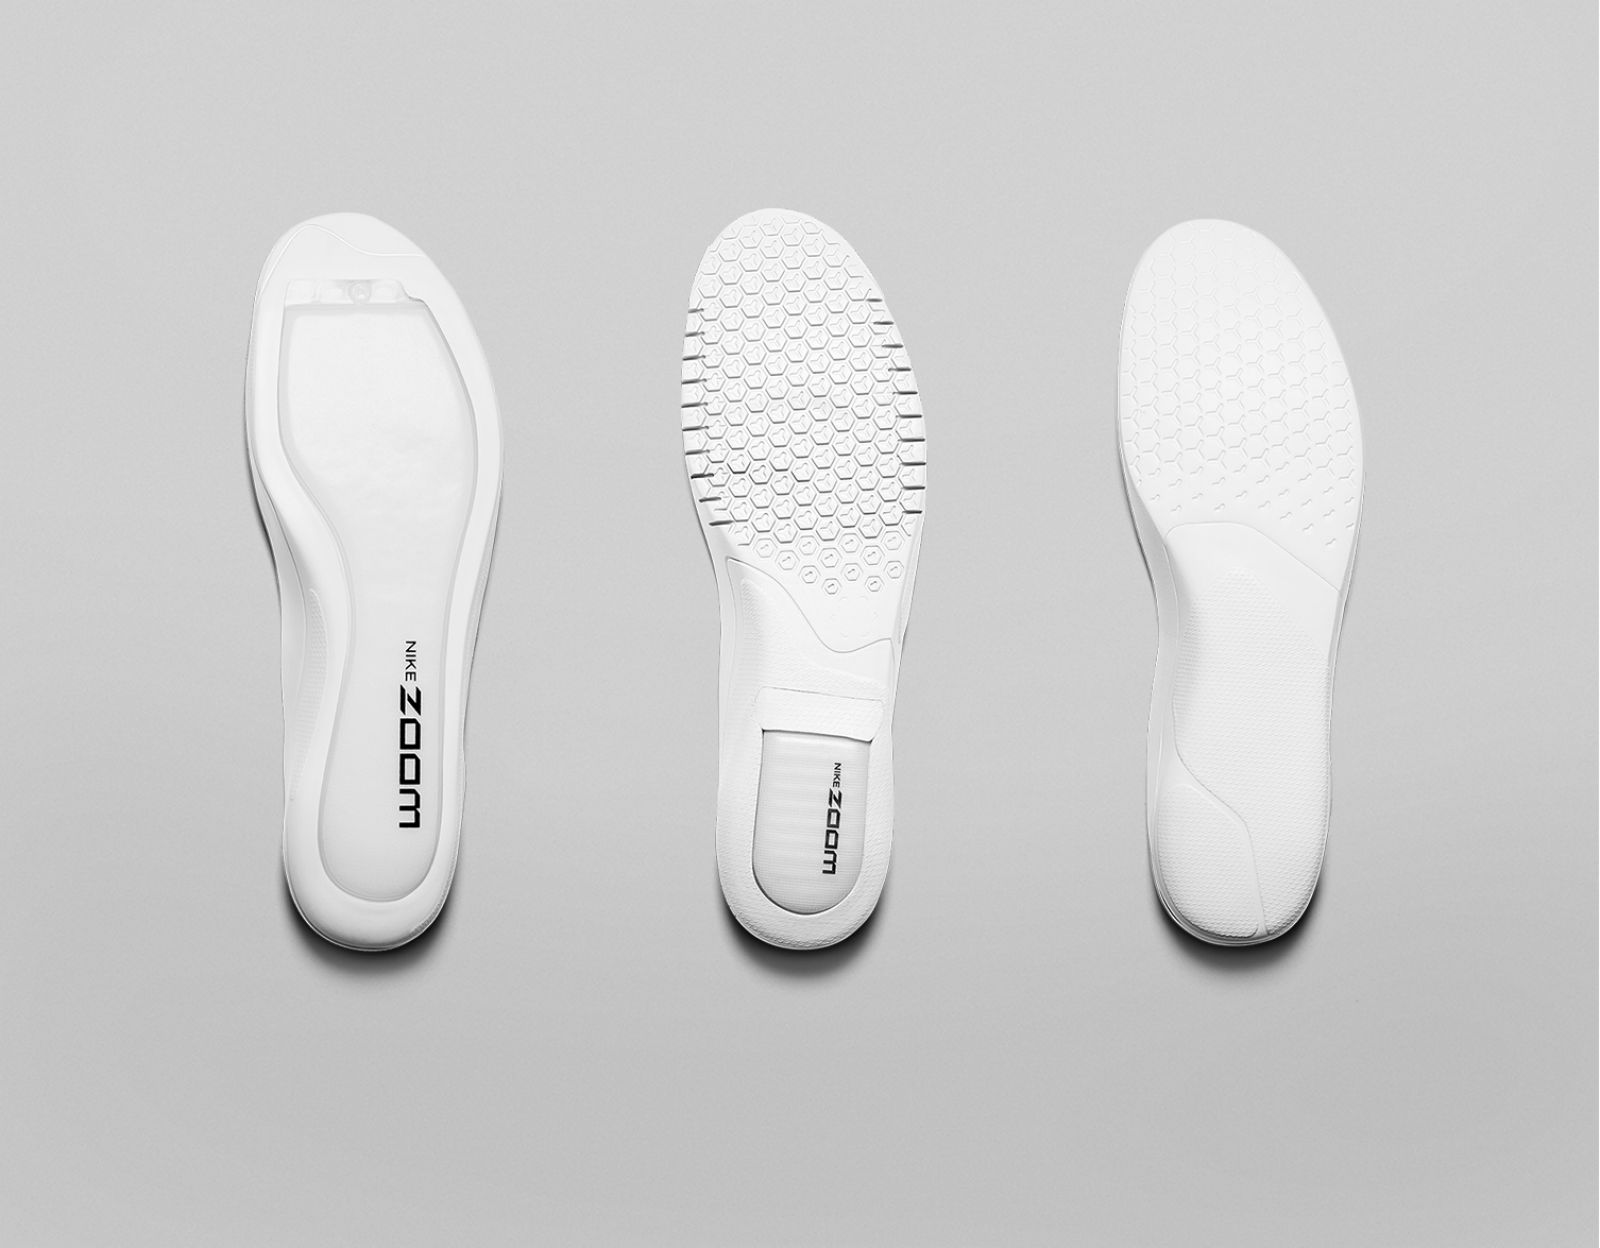 nike full length zoom insole